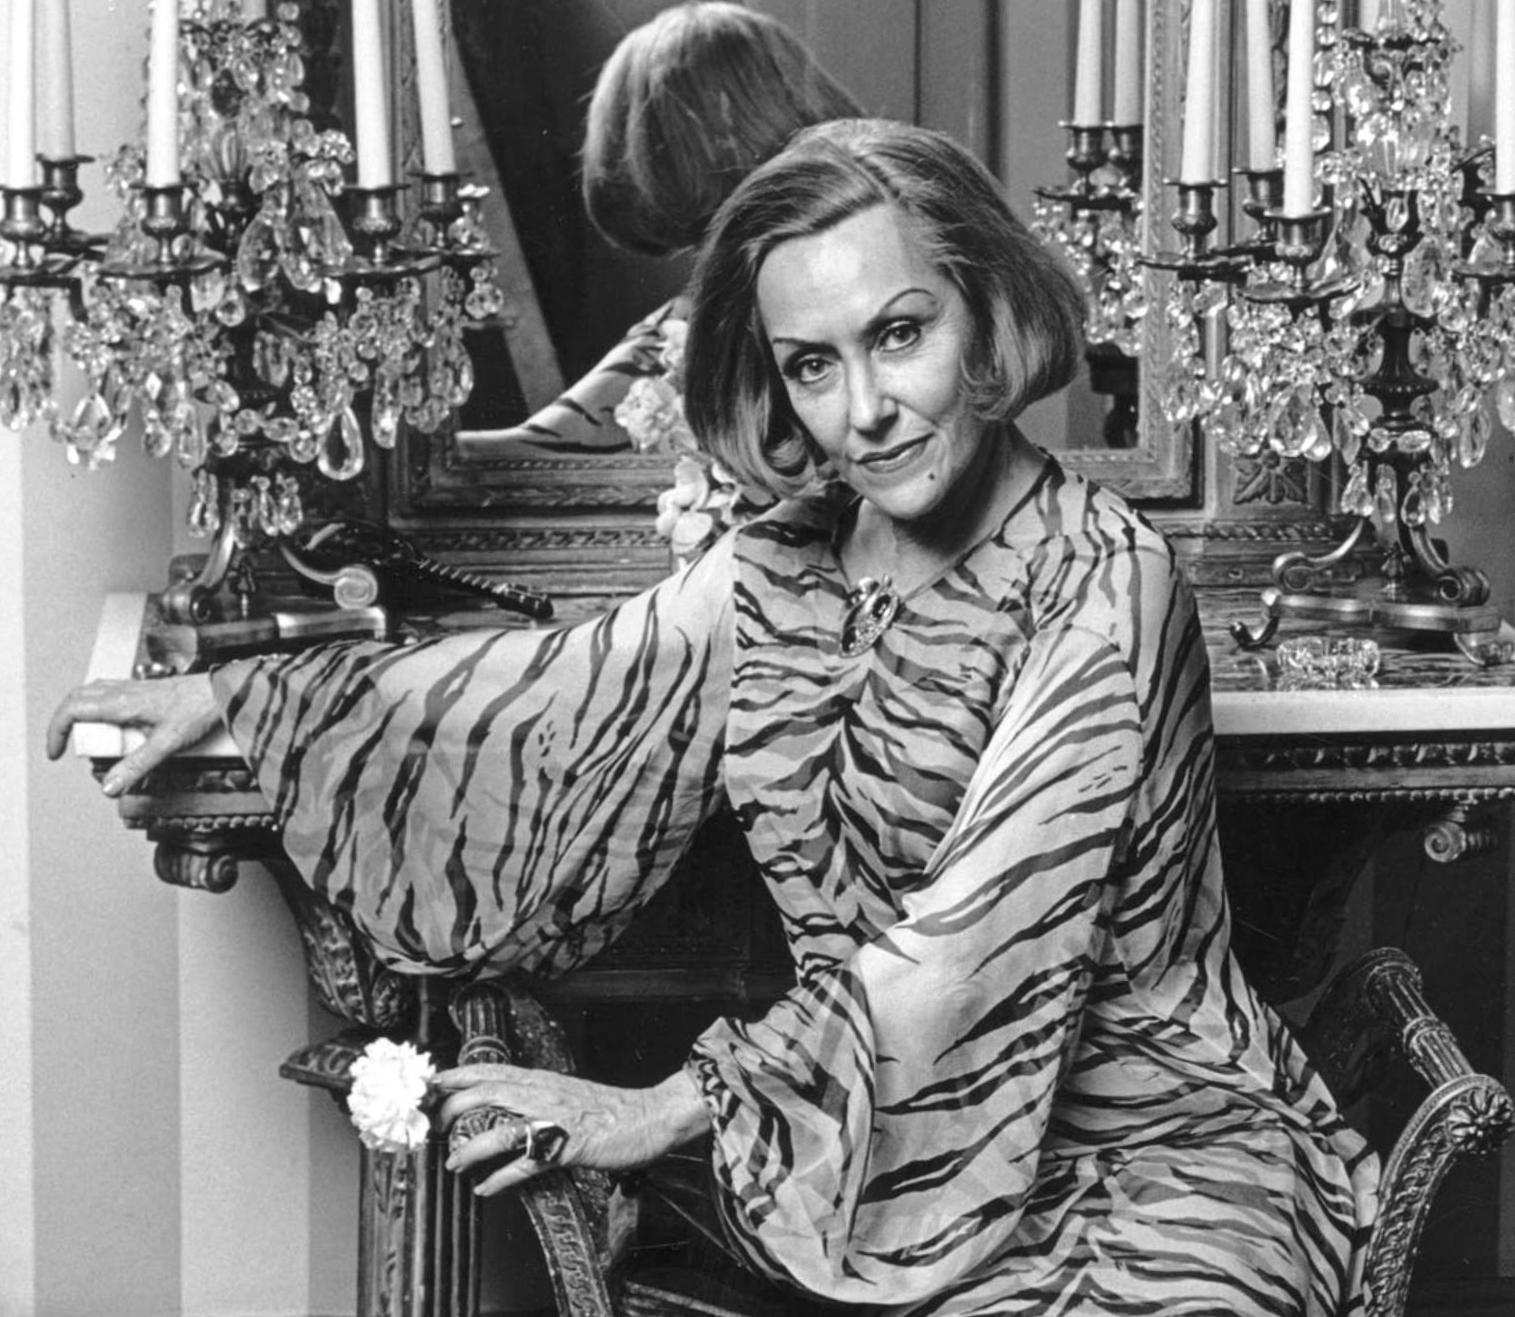 Iconic 'Sunset Boulevard' Hollywood Film Star Gloria Swanson at home in NYC - Photograph by Jack Mitchell